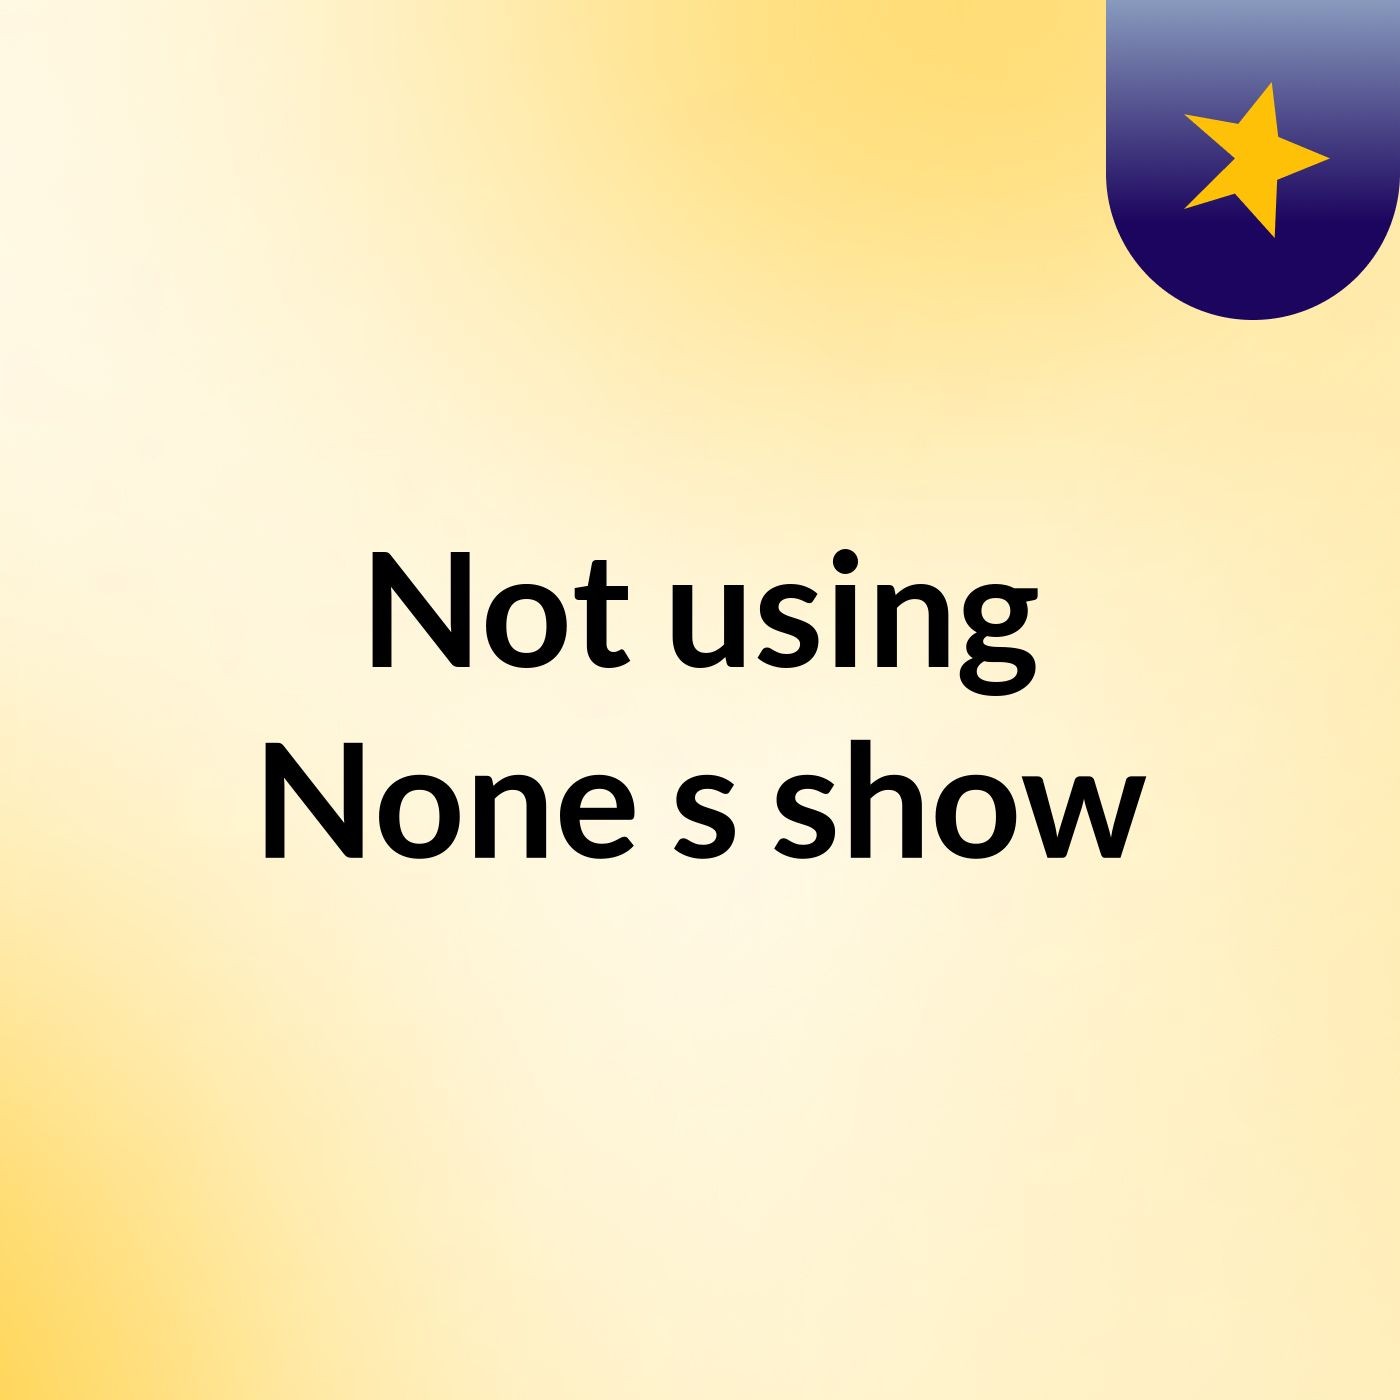 Not using None's show